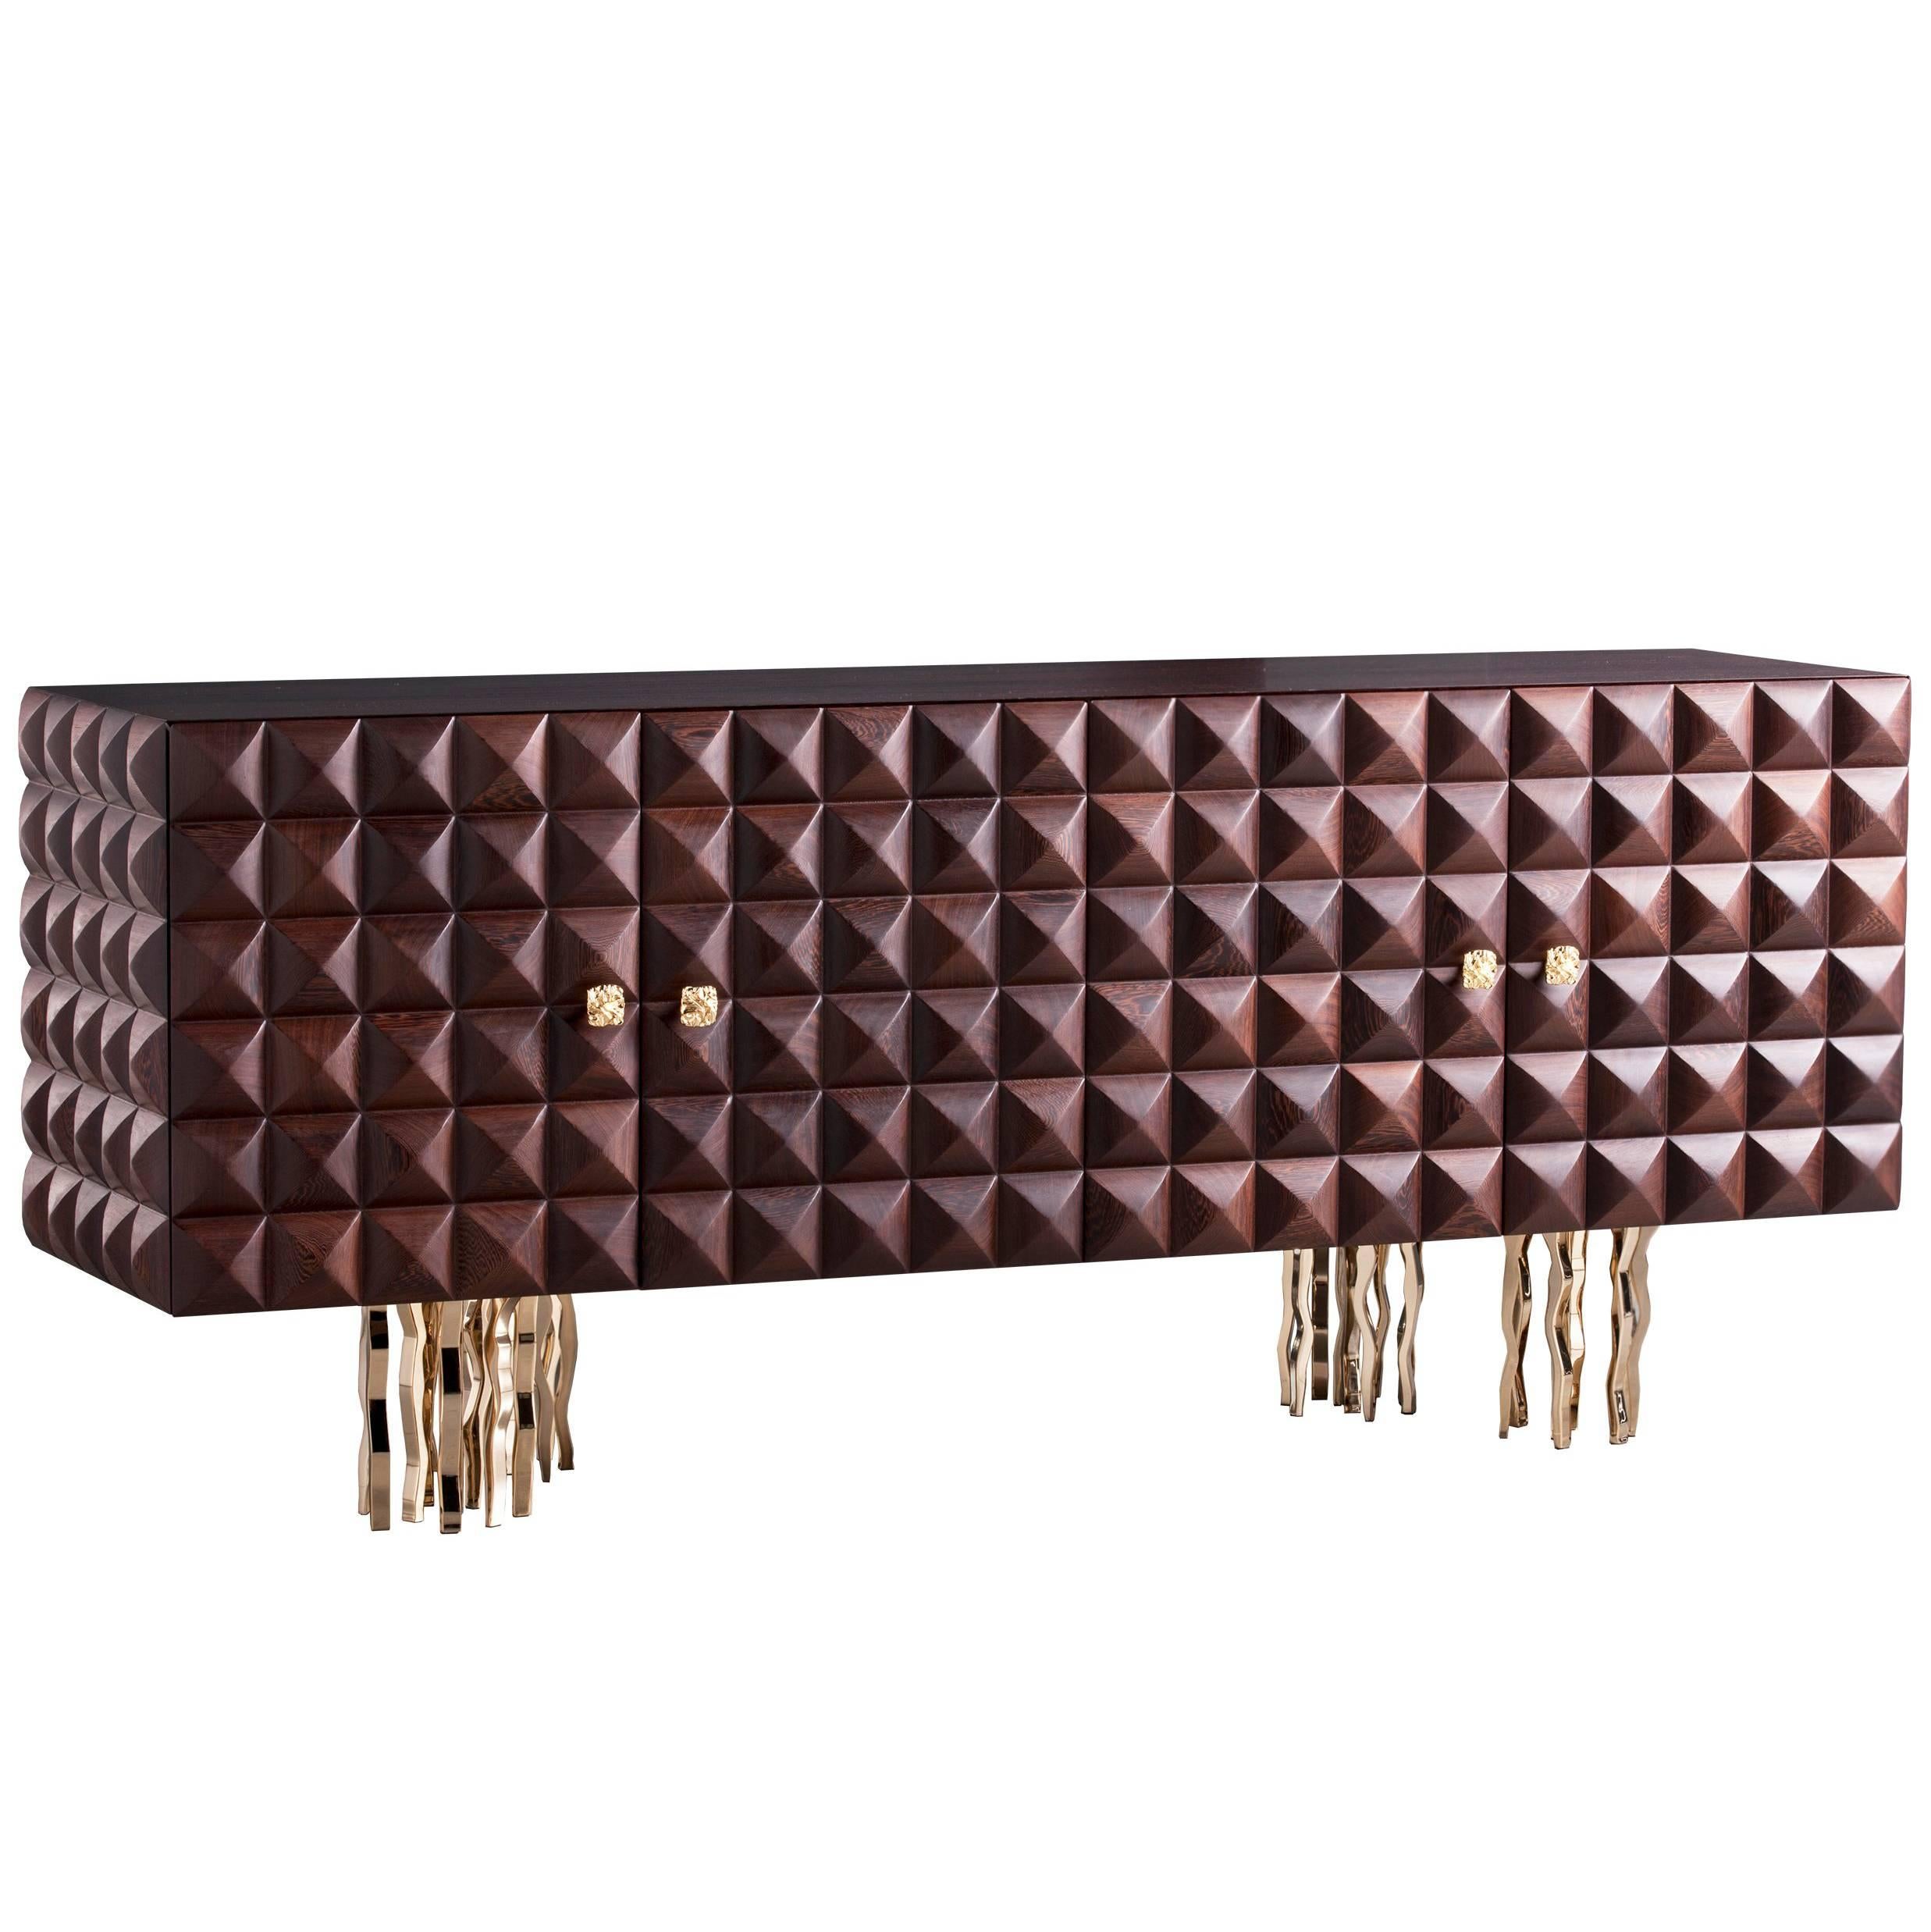 "Il Pezzo 10 Credenza" made of embossed solid wenge and gold plated brass